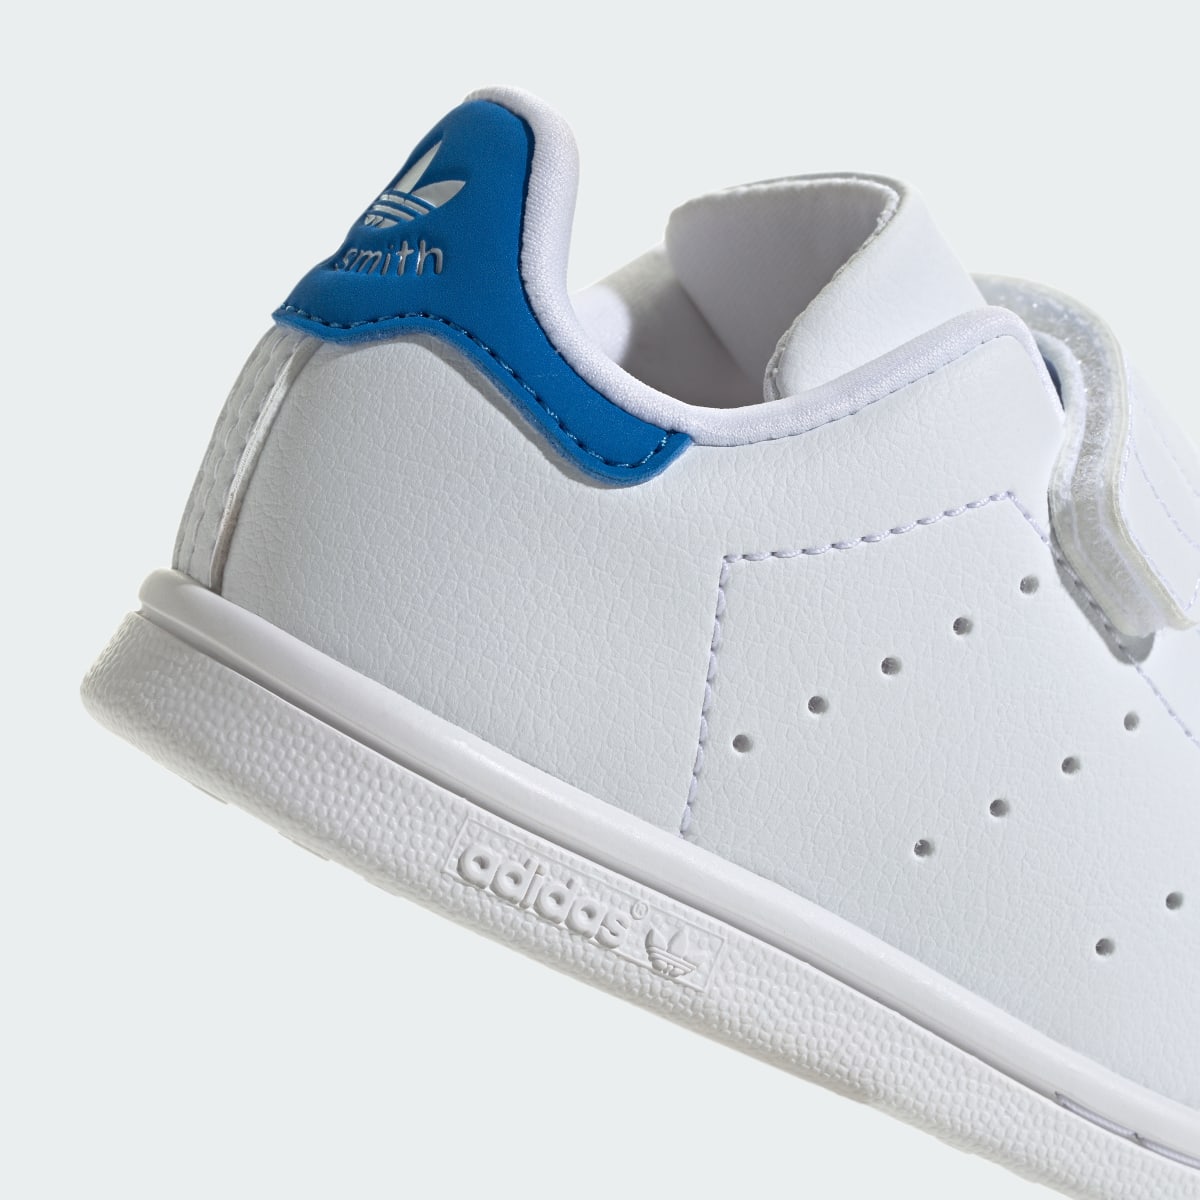 Adidas Stan Smith Comfort Closure Shoes Kids. 10